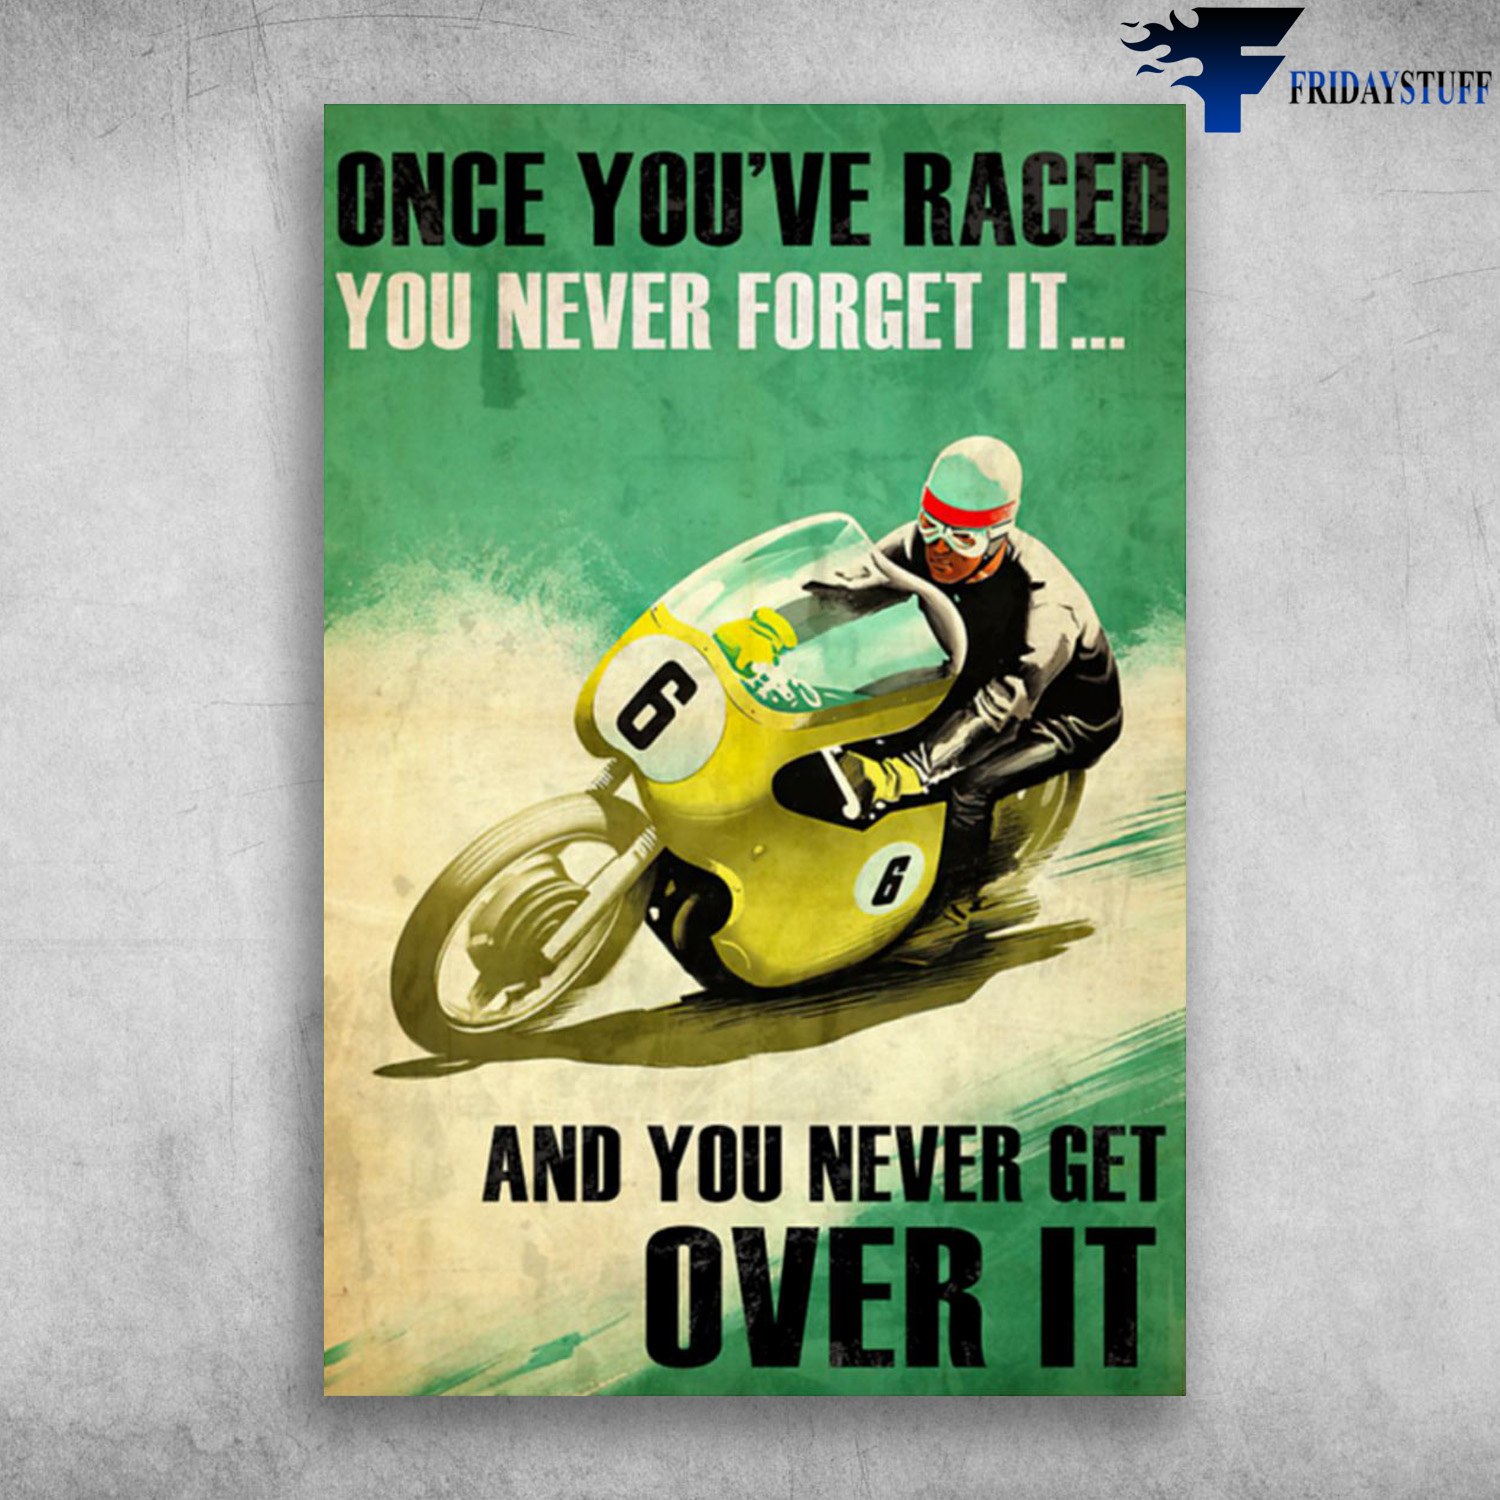 Grand Prix Motorcycle Racing - Once You've Raced, You Never Forget It, And You Never Get Over It